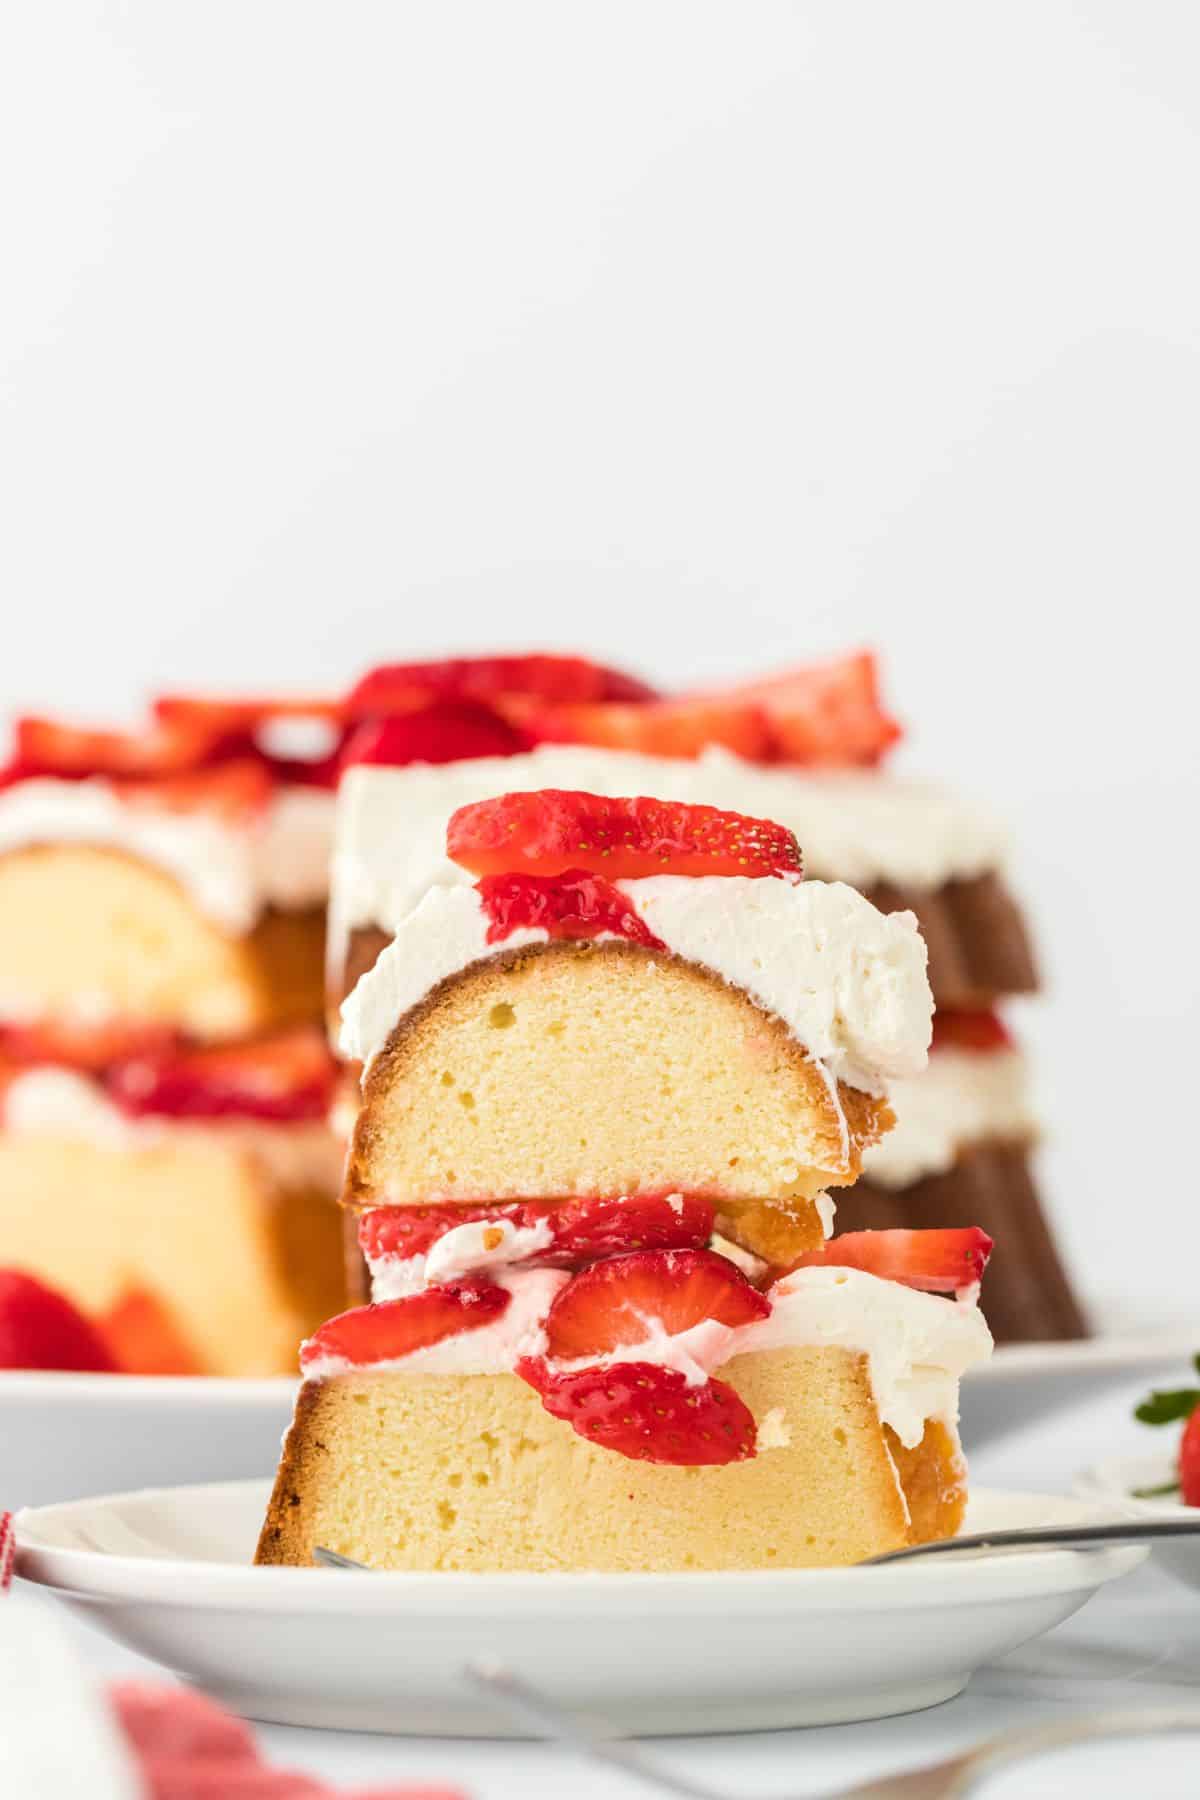 Closeup of a slice of strawberry shortcake pound cake on a plate, showing the texture of the cake and the layers of whipped cream and fresh strawberry slices, with more of the cake in the background